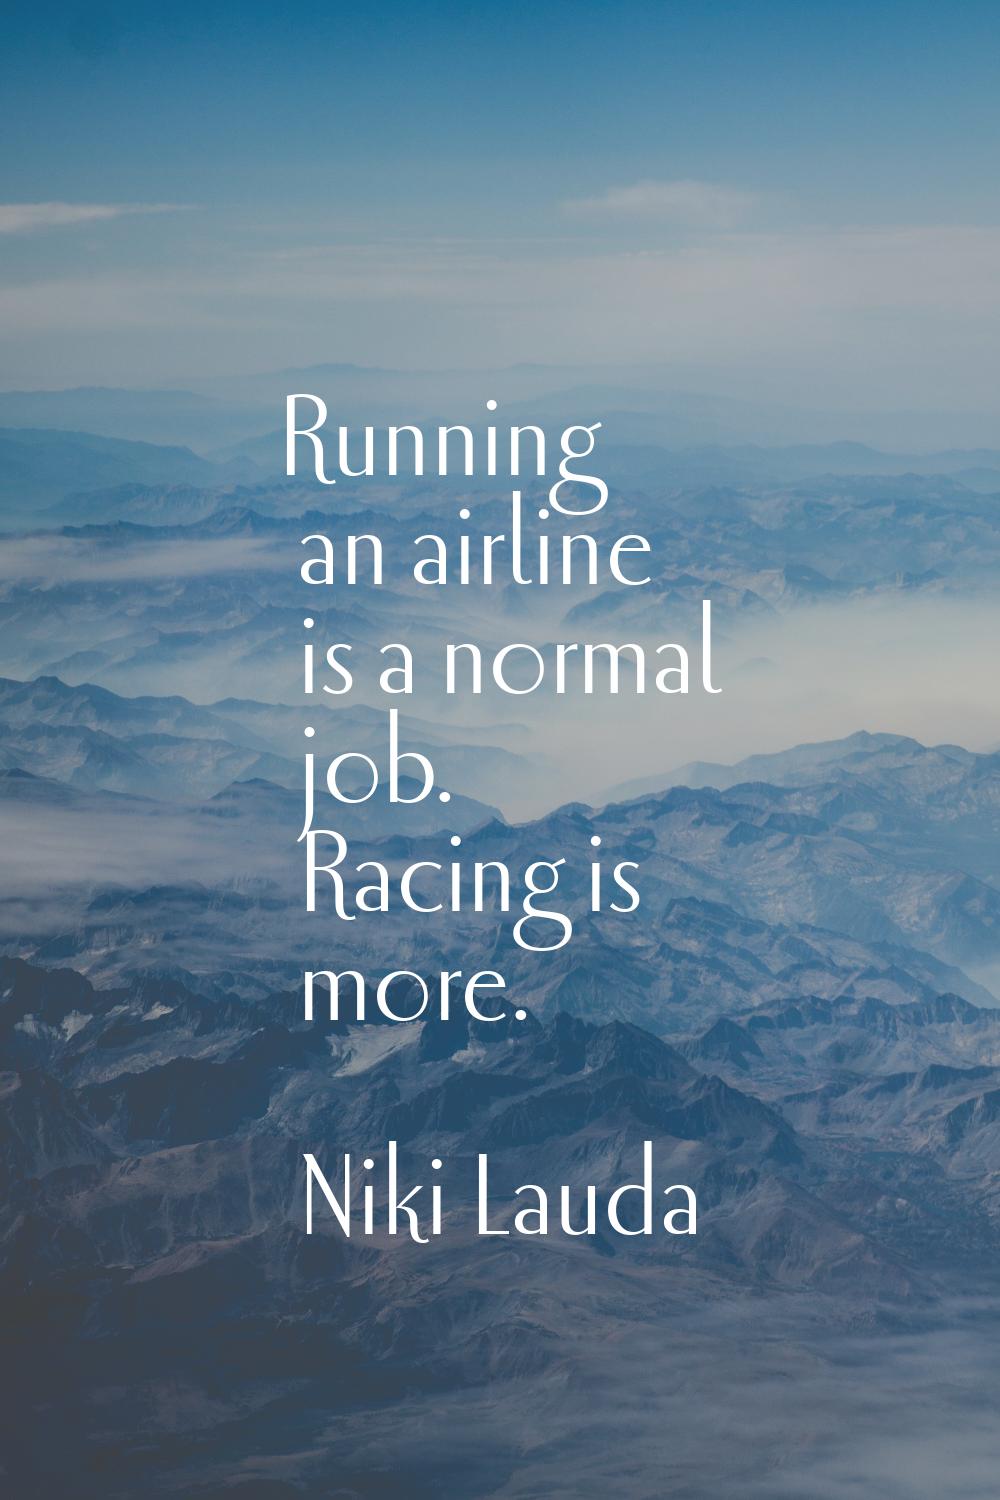 Running an airline is a normal job. Racing is more.